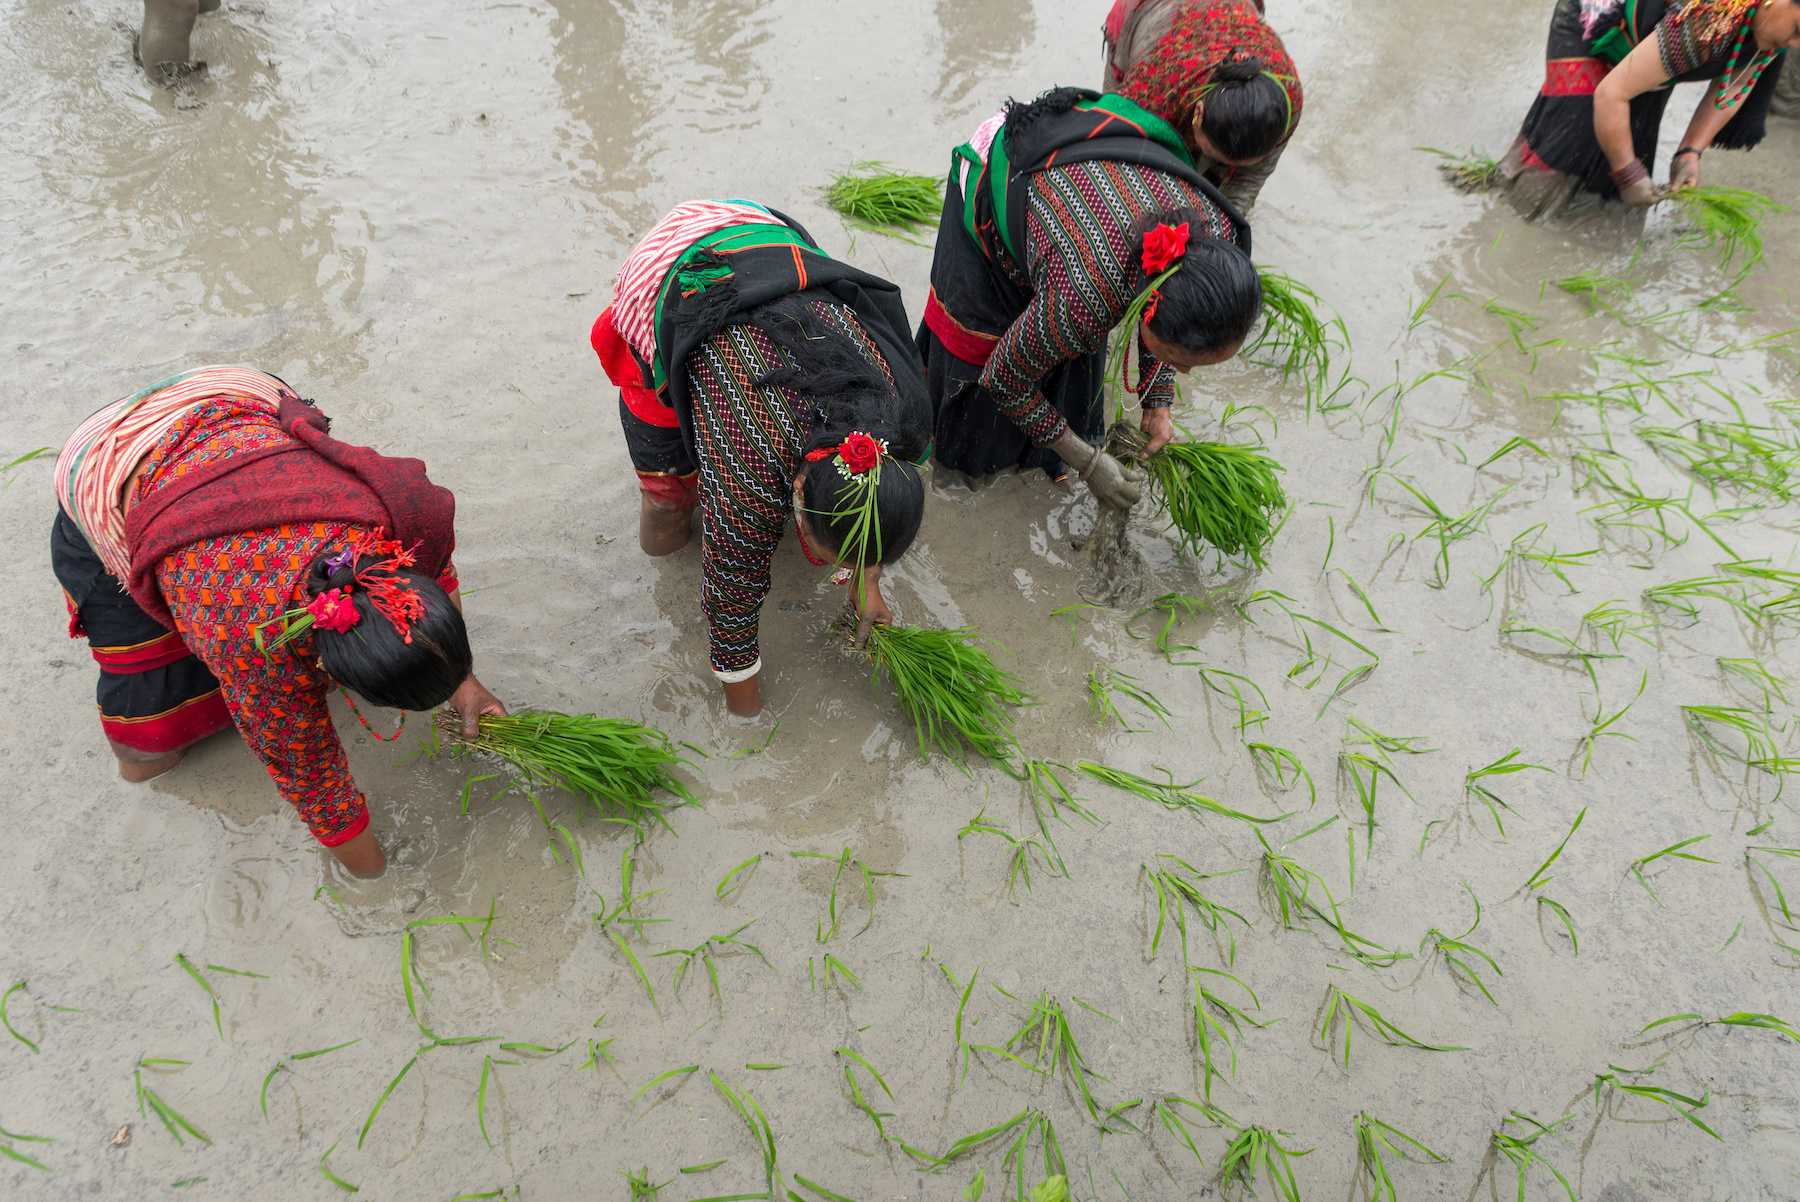 Woman are bend over a paddy field and are planting rice seedlings.